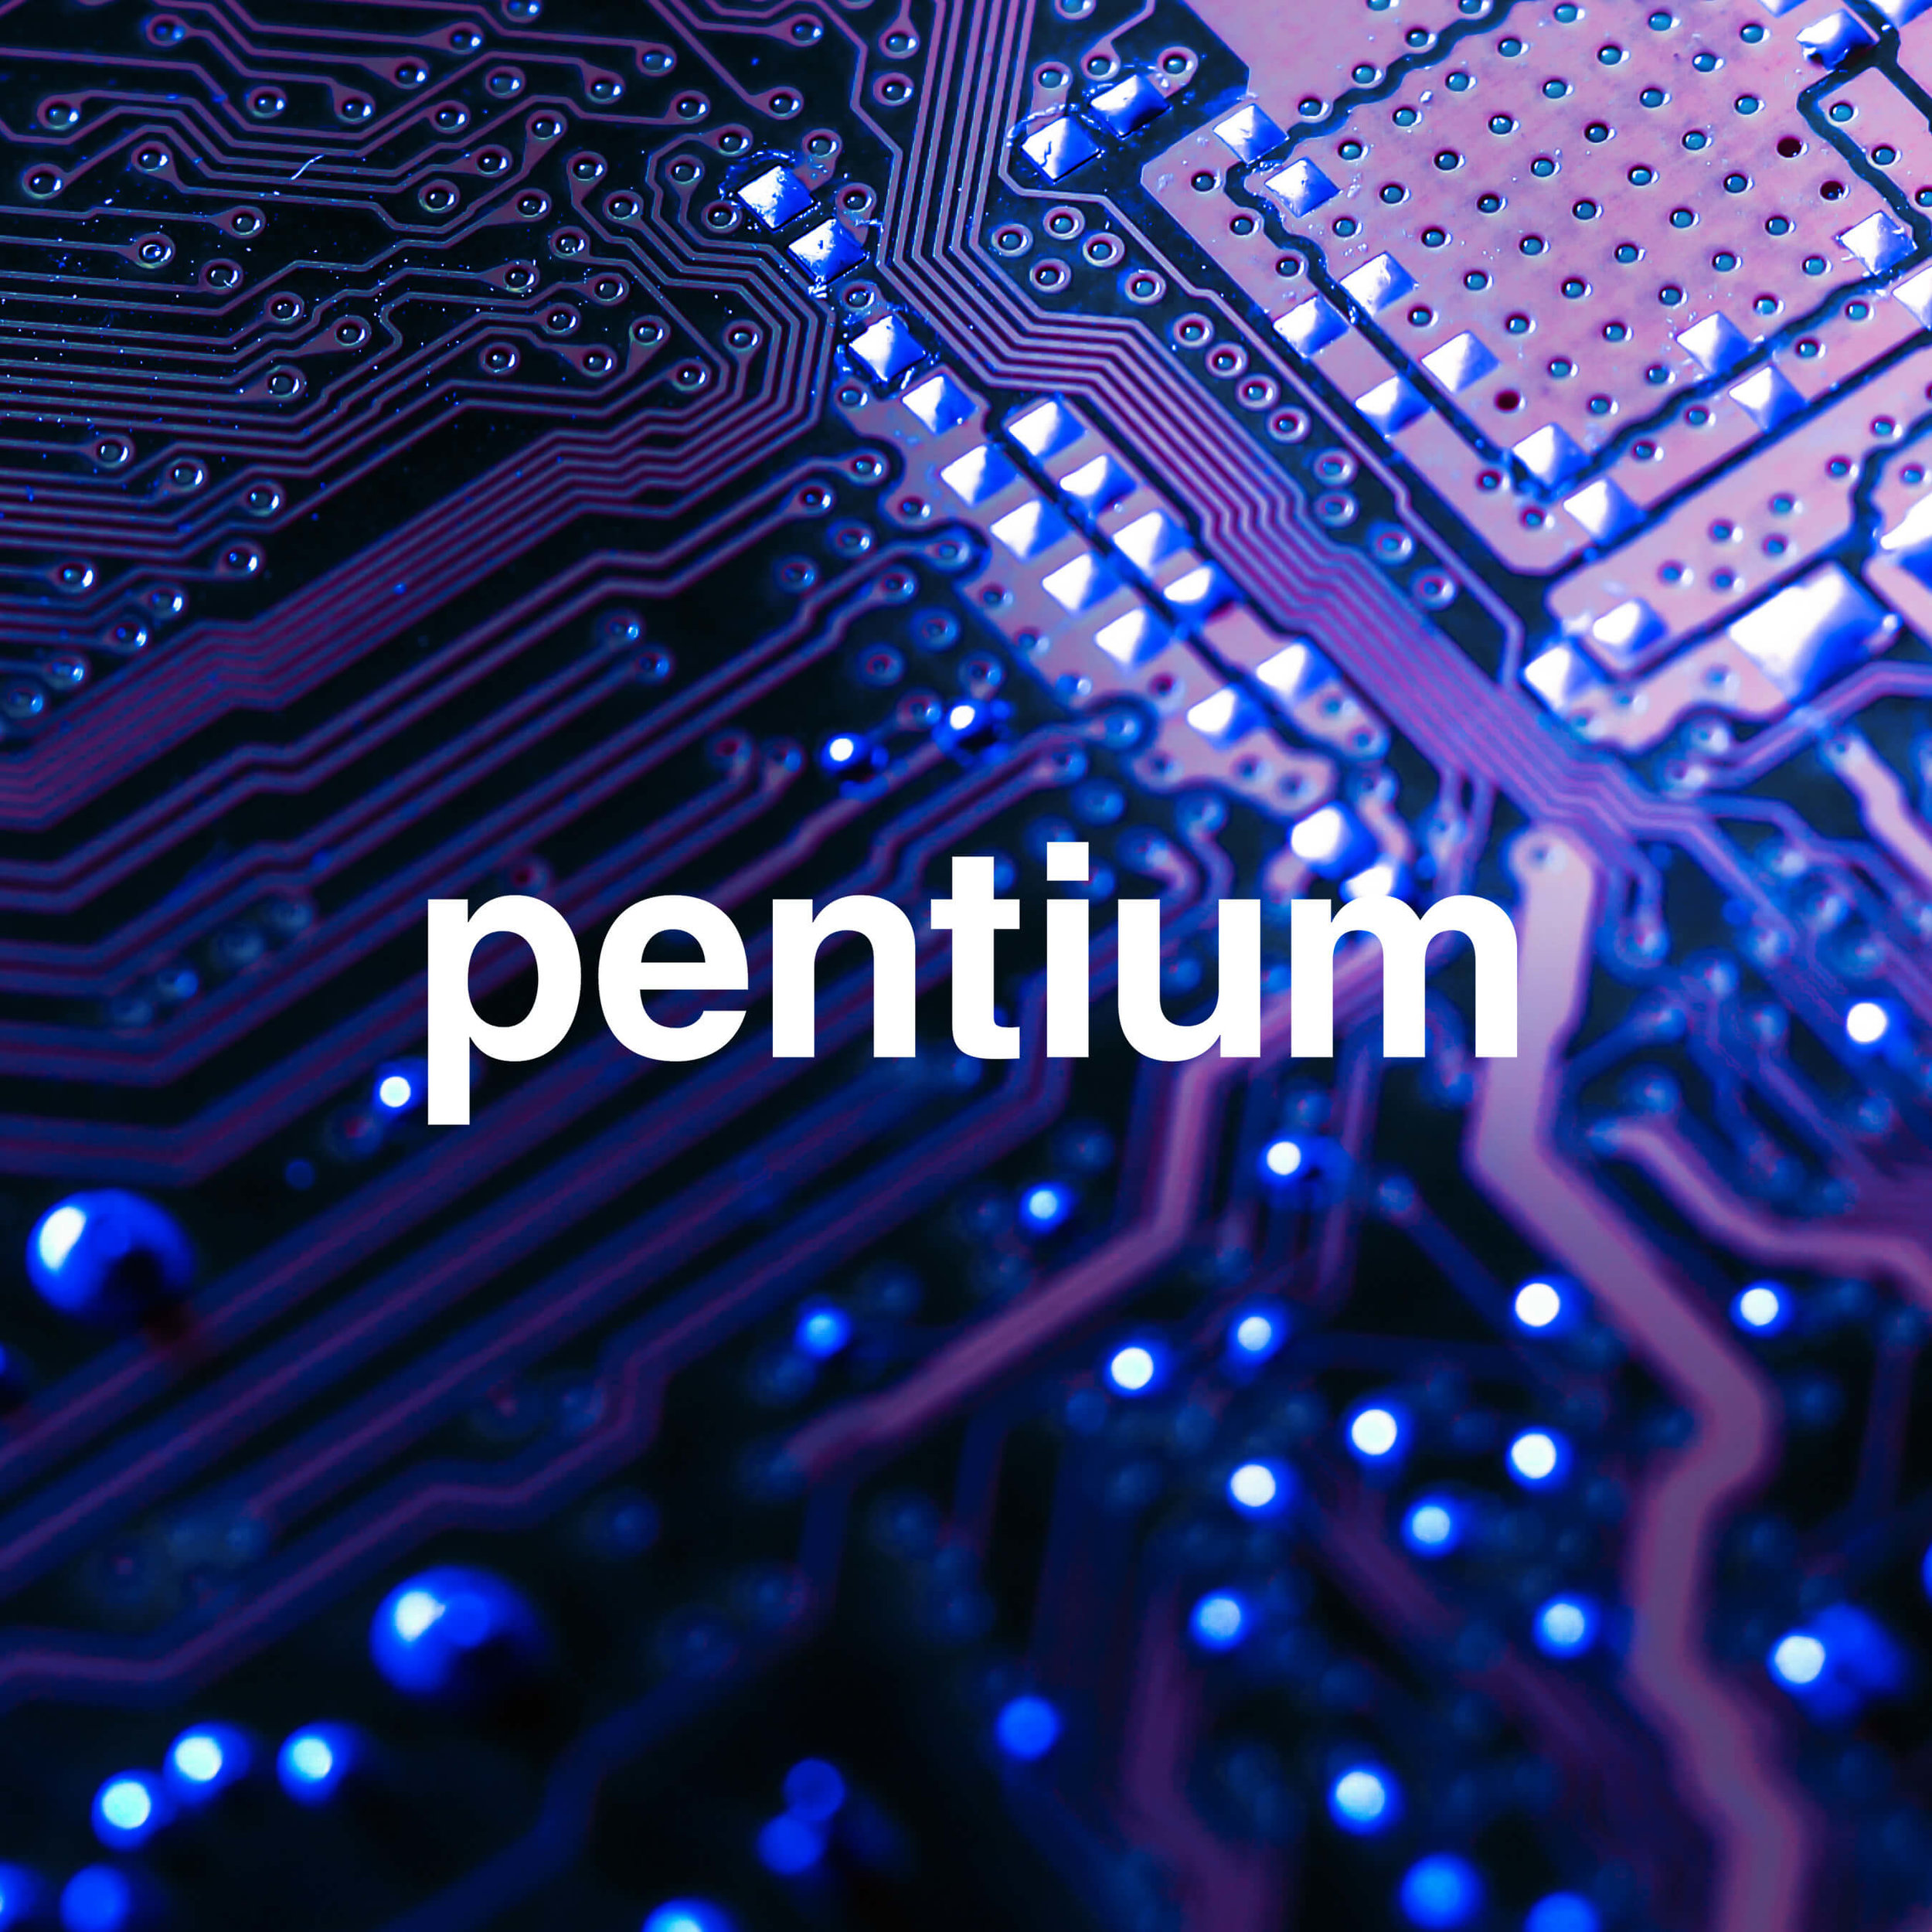 Pentium Revolutionary Brand Name Created for Intel by Lexicon Branding, Leading Naming Agency